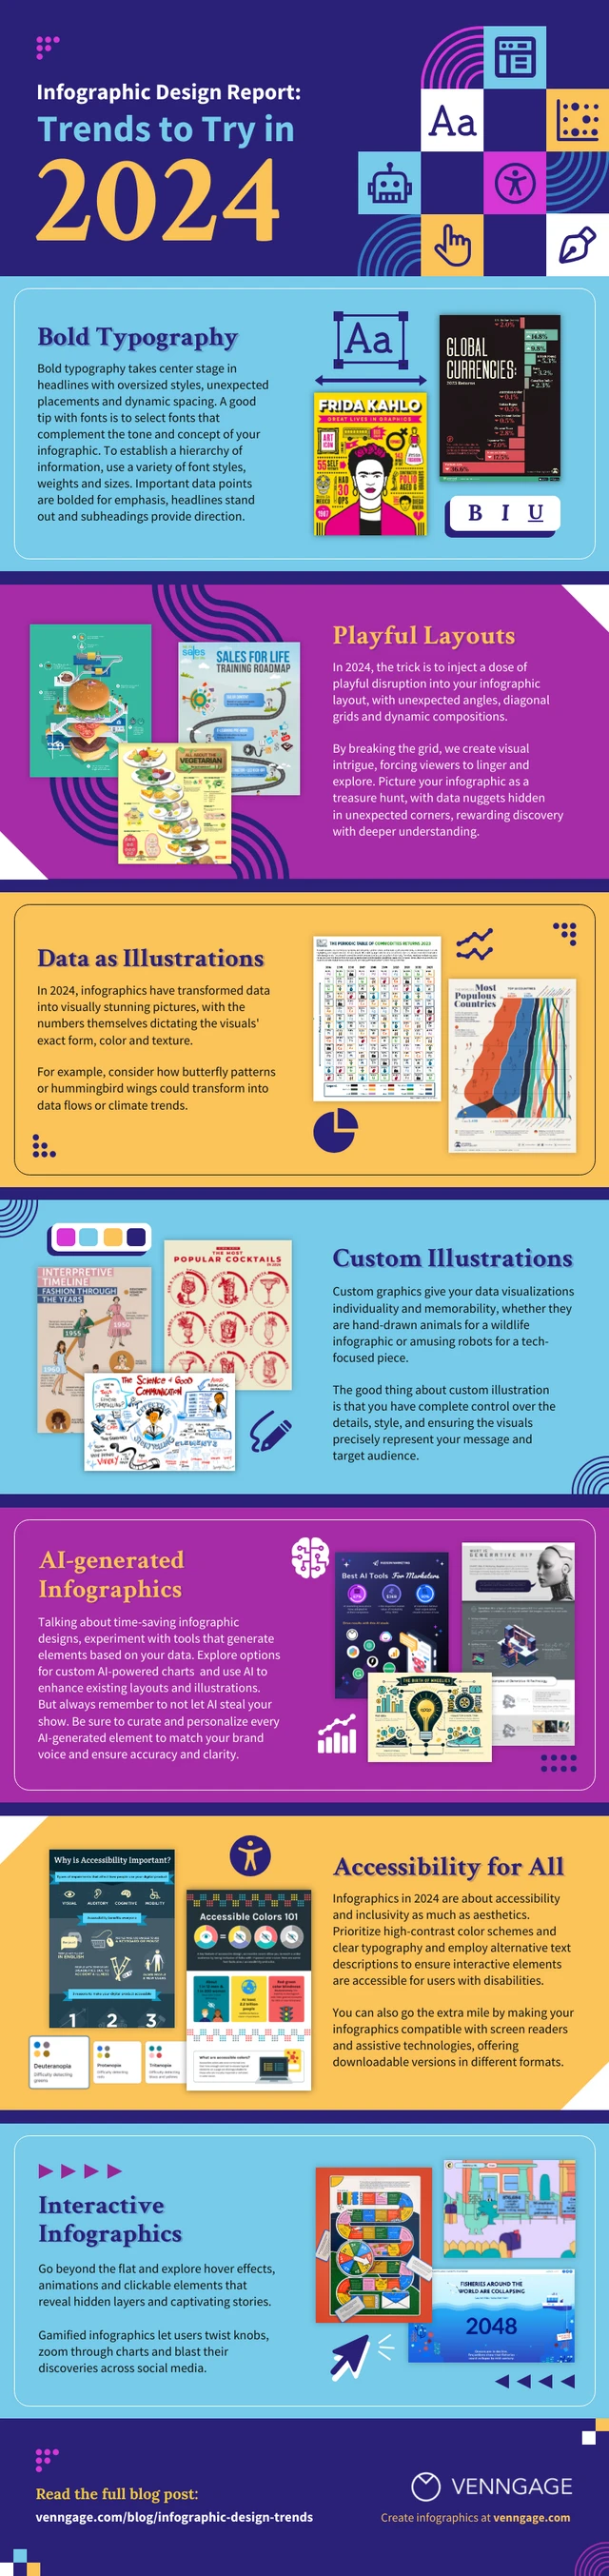 Infographic Design Trends 2024 Template